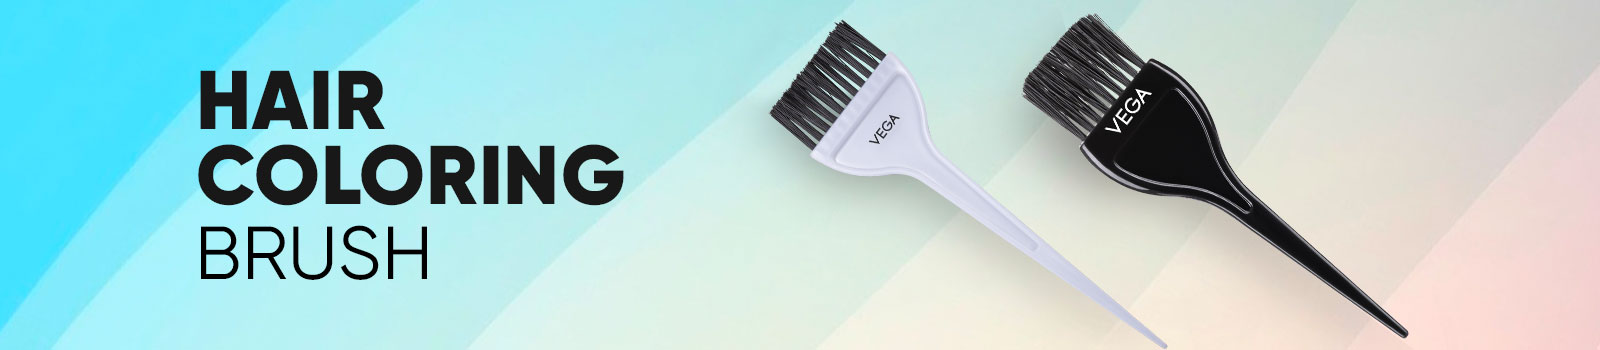 Hair Coloring Brushes